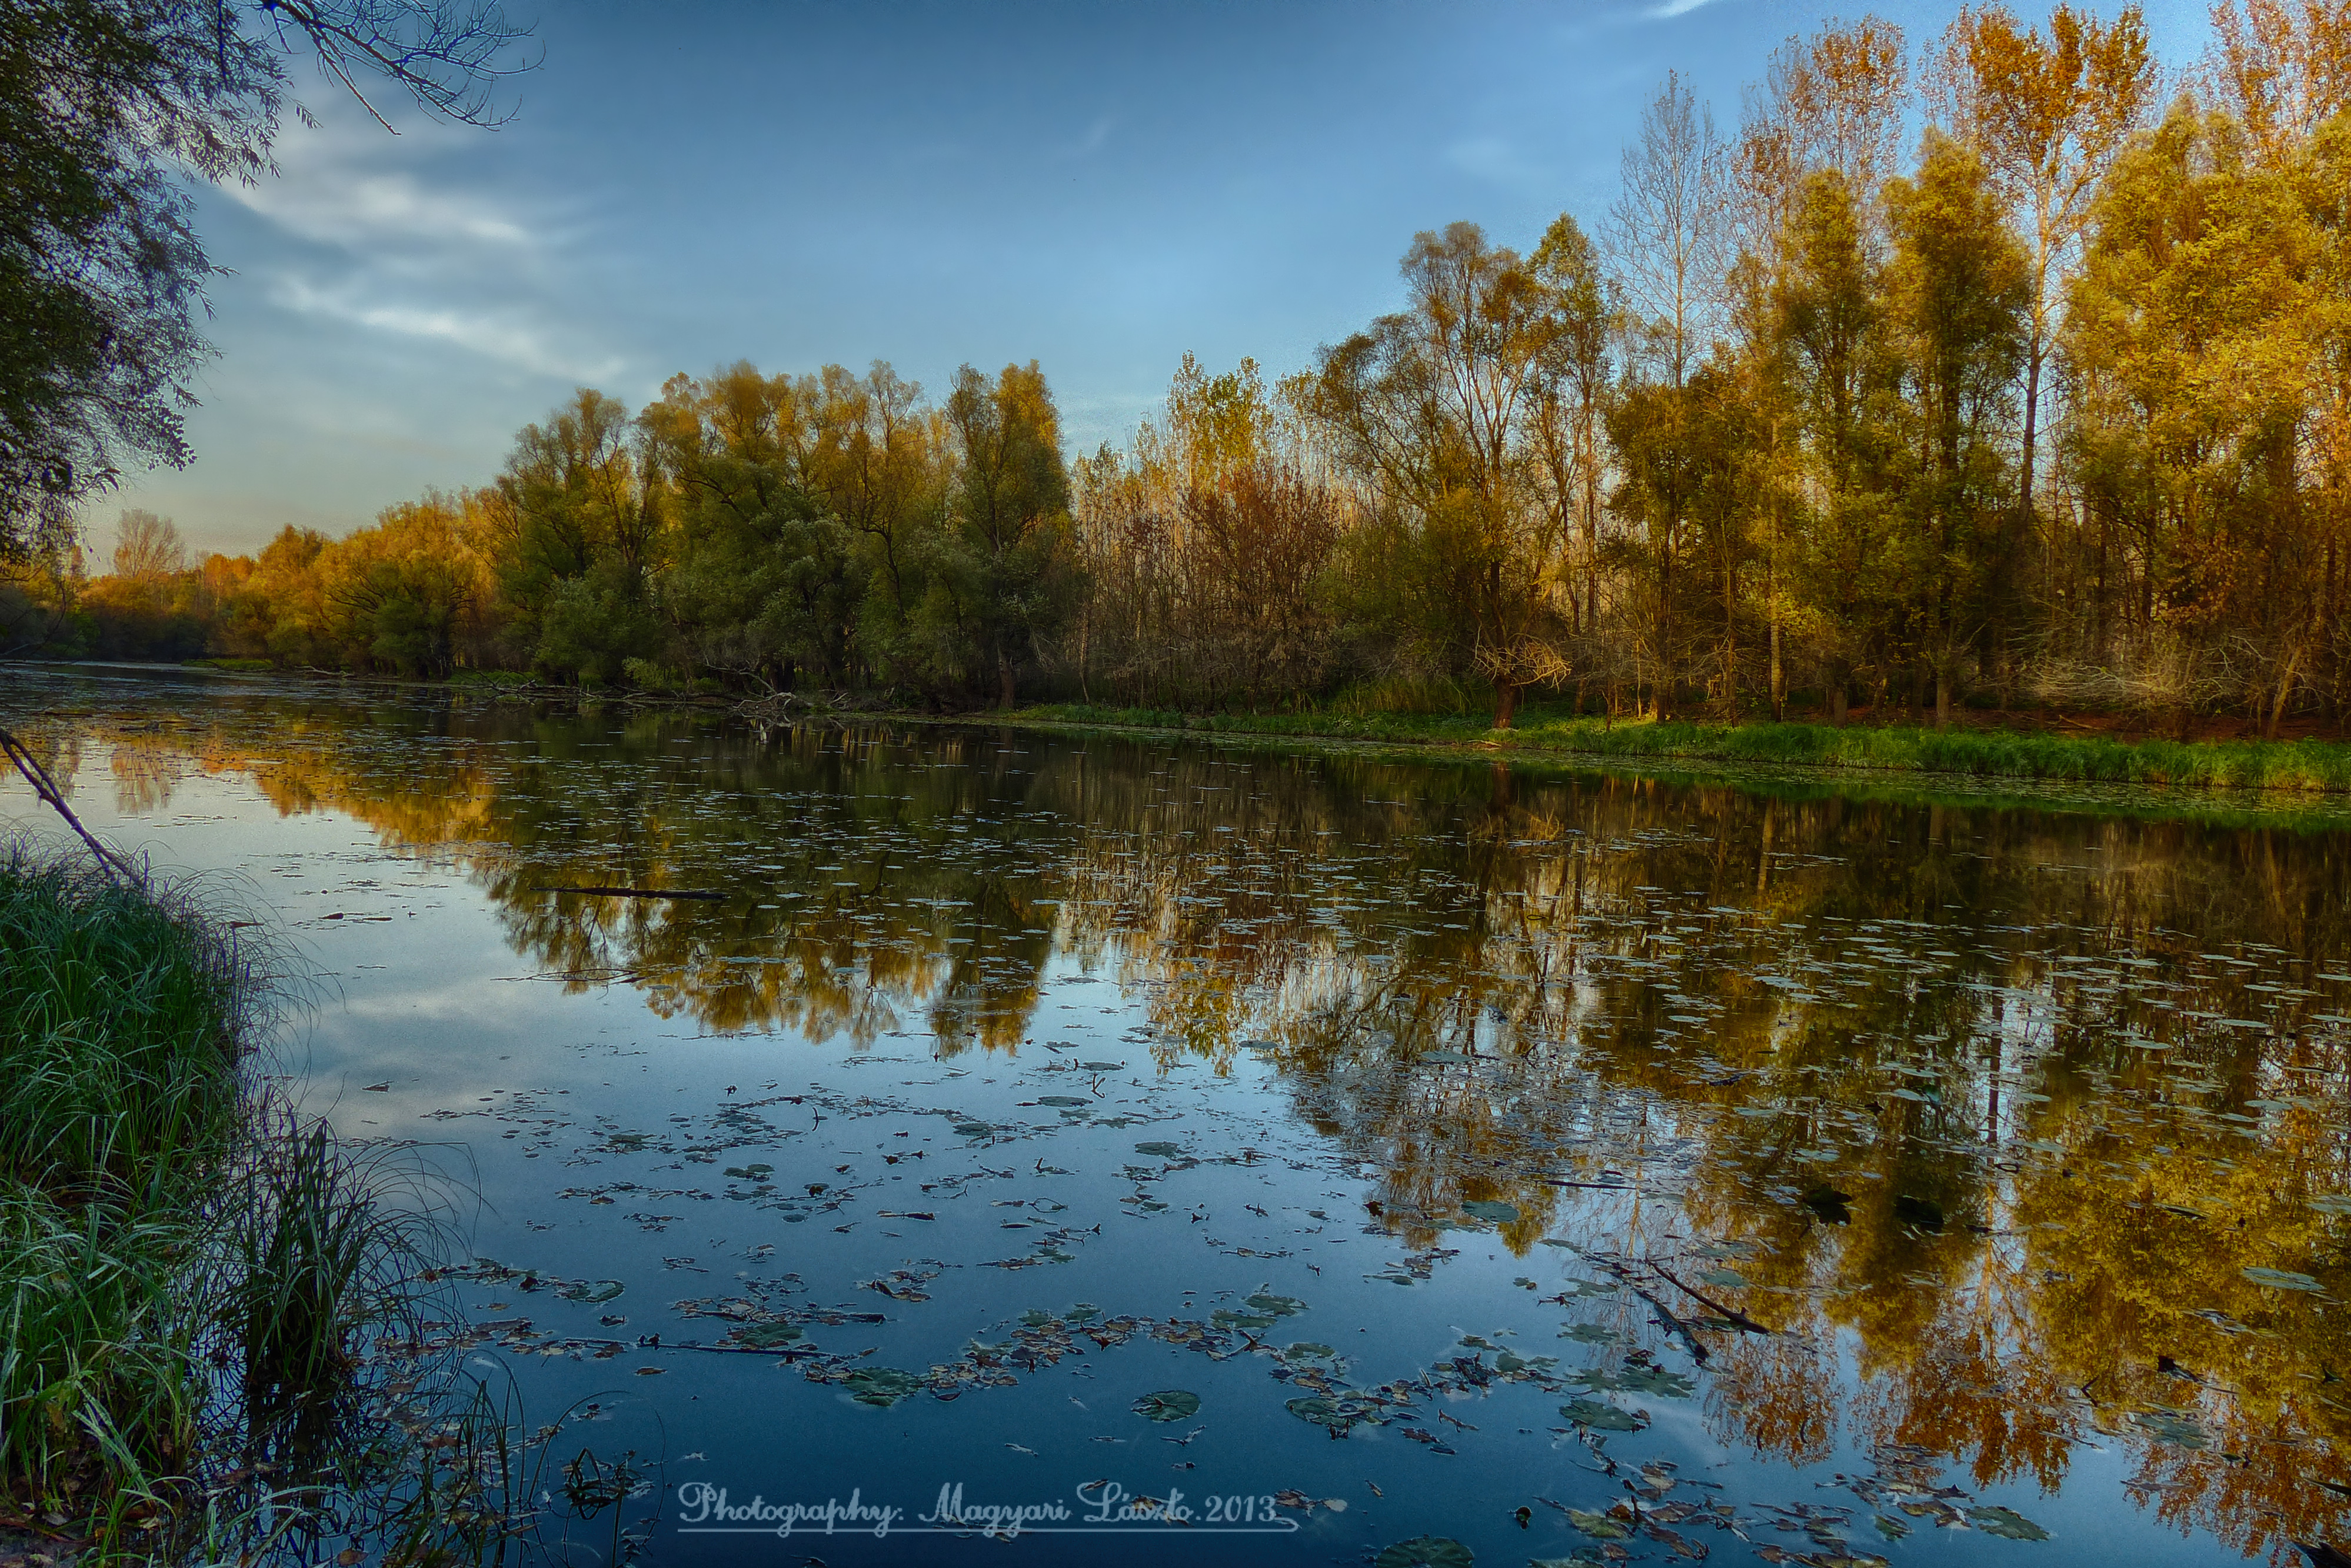 The Old Danube-River. Hungary. HDR. magyarilaszlo on DeviantArt